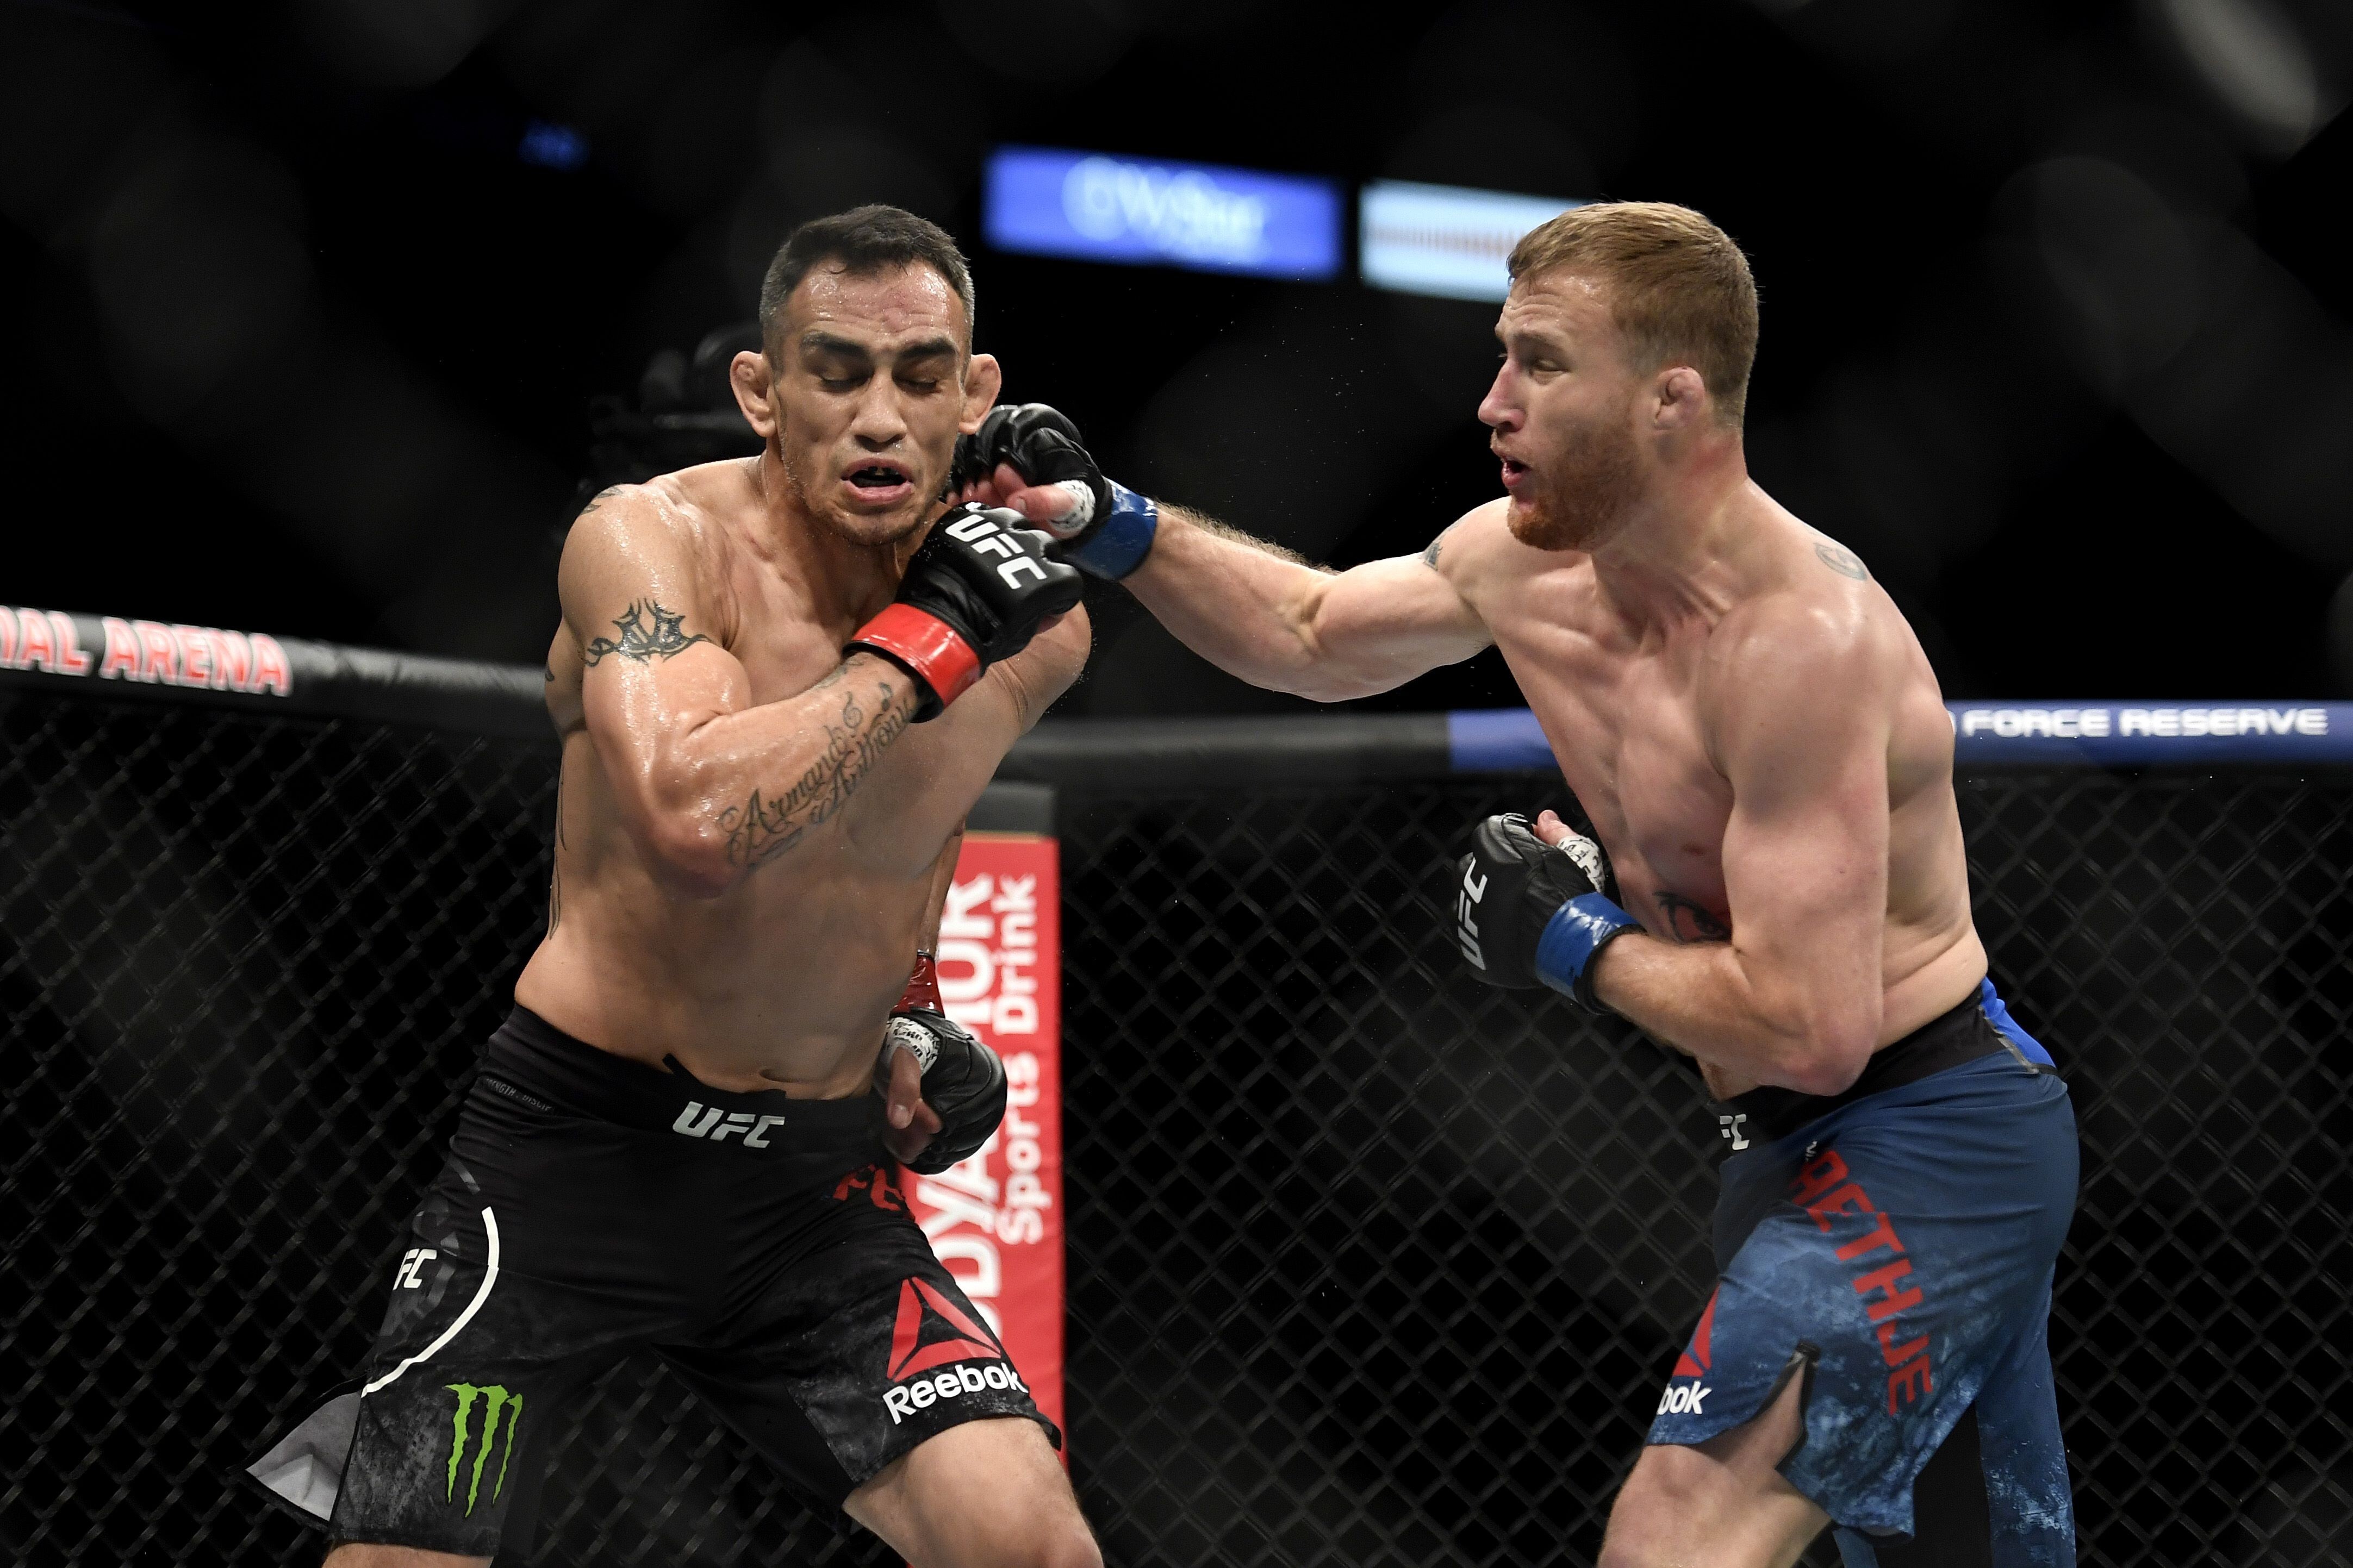 Justin Gaethje punches Tony Ferguson in their UFC interim lightweight title fight at UFC 249 in the VyStar Veterans Memorial Arena in Jacksonville, Florida in May. Photo: AFP